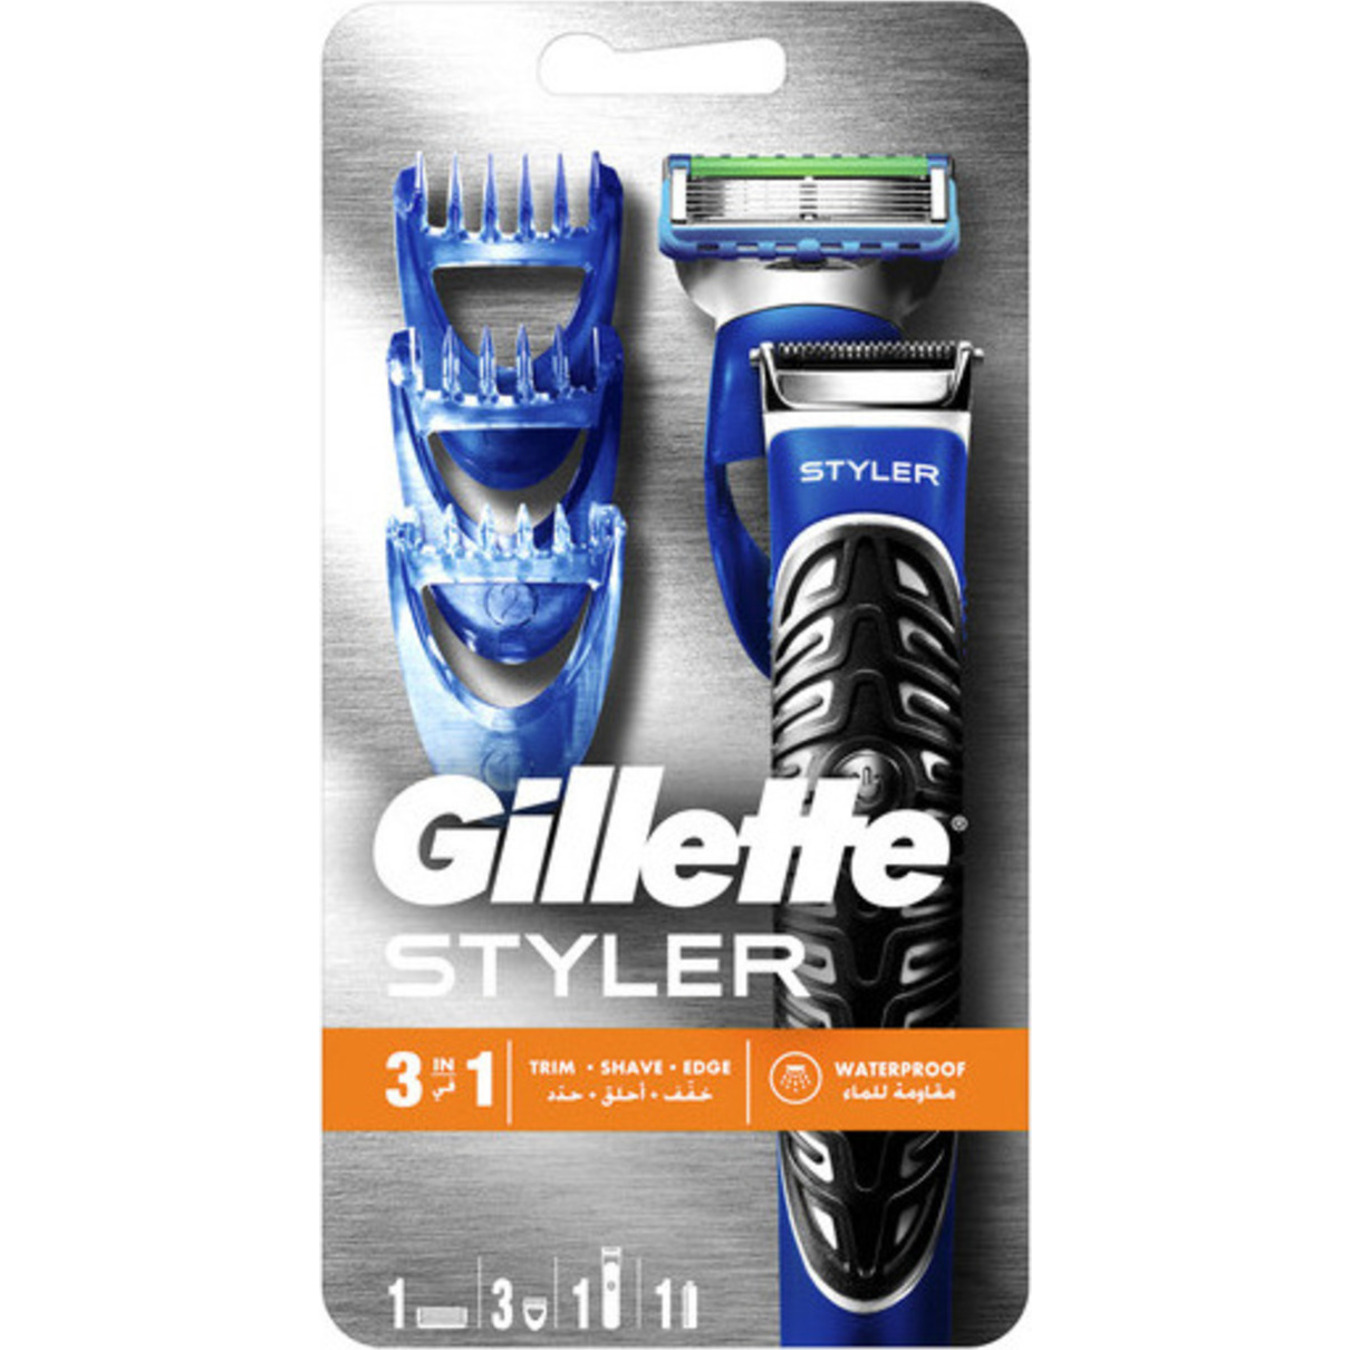 Styler Fusion ProGlide Styler+1 Power+3 cartridge with nozzles for beard and mustache modeling